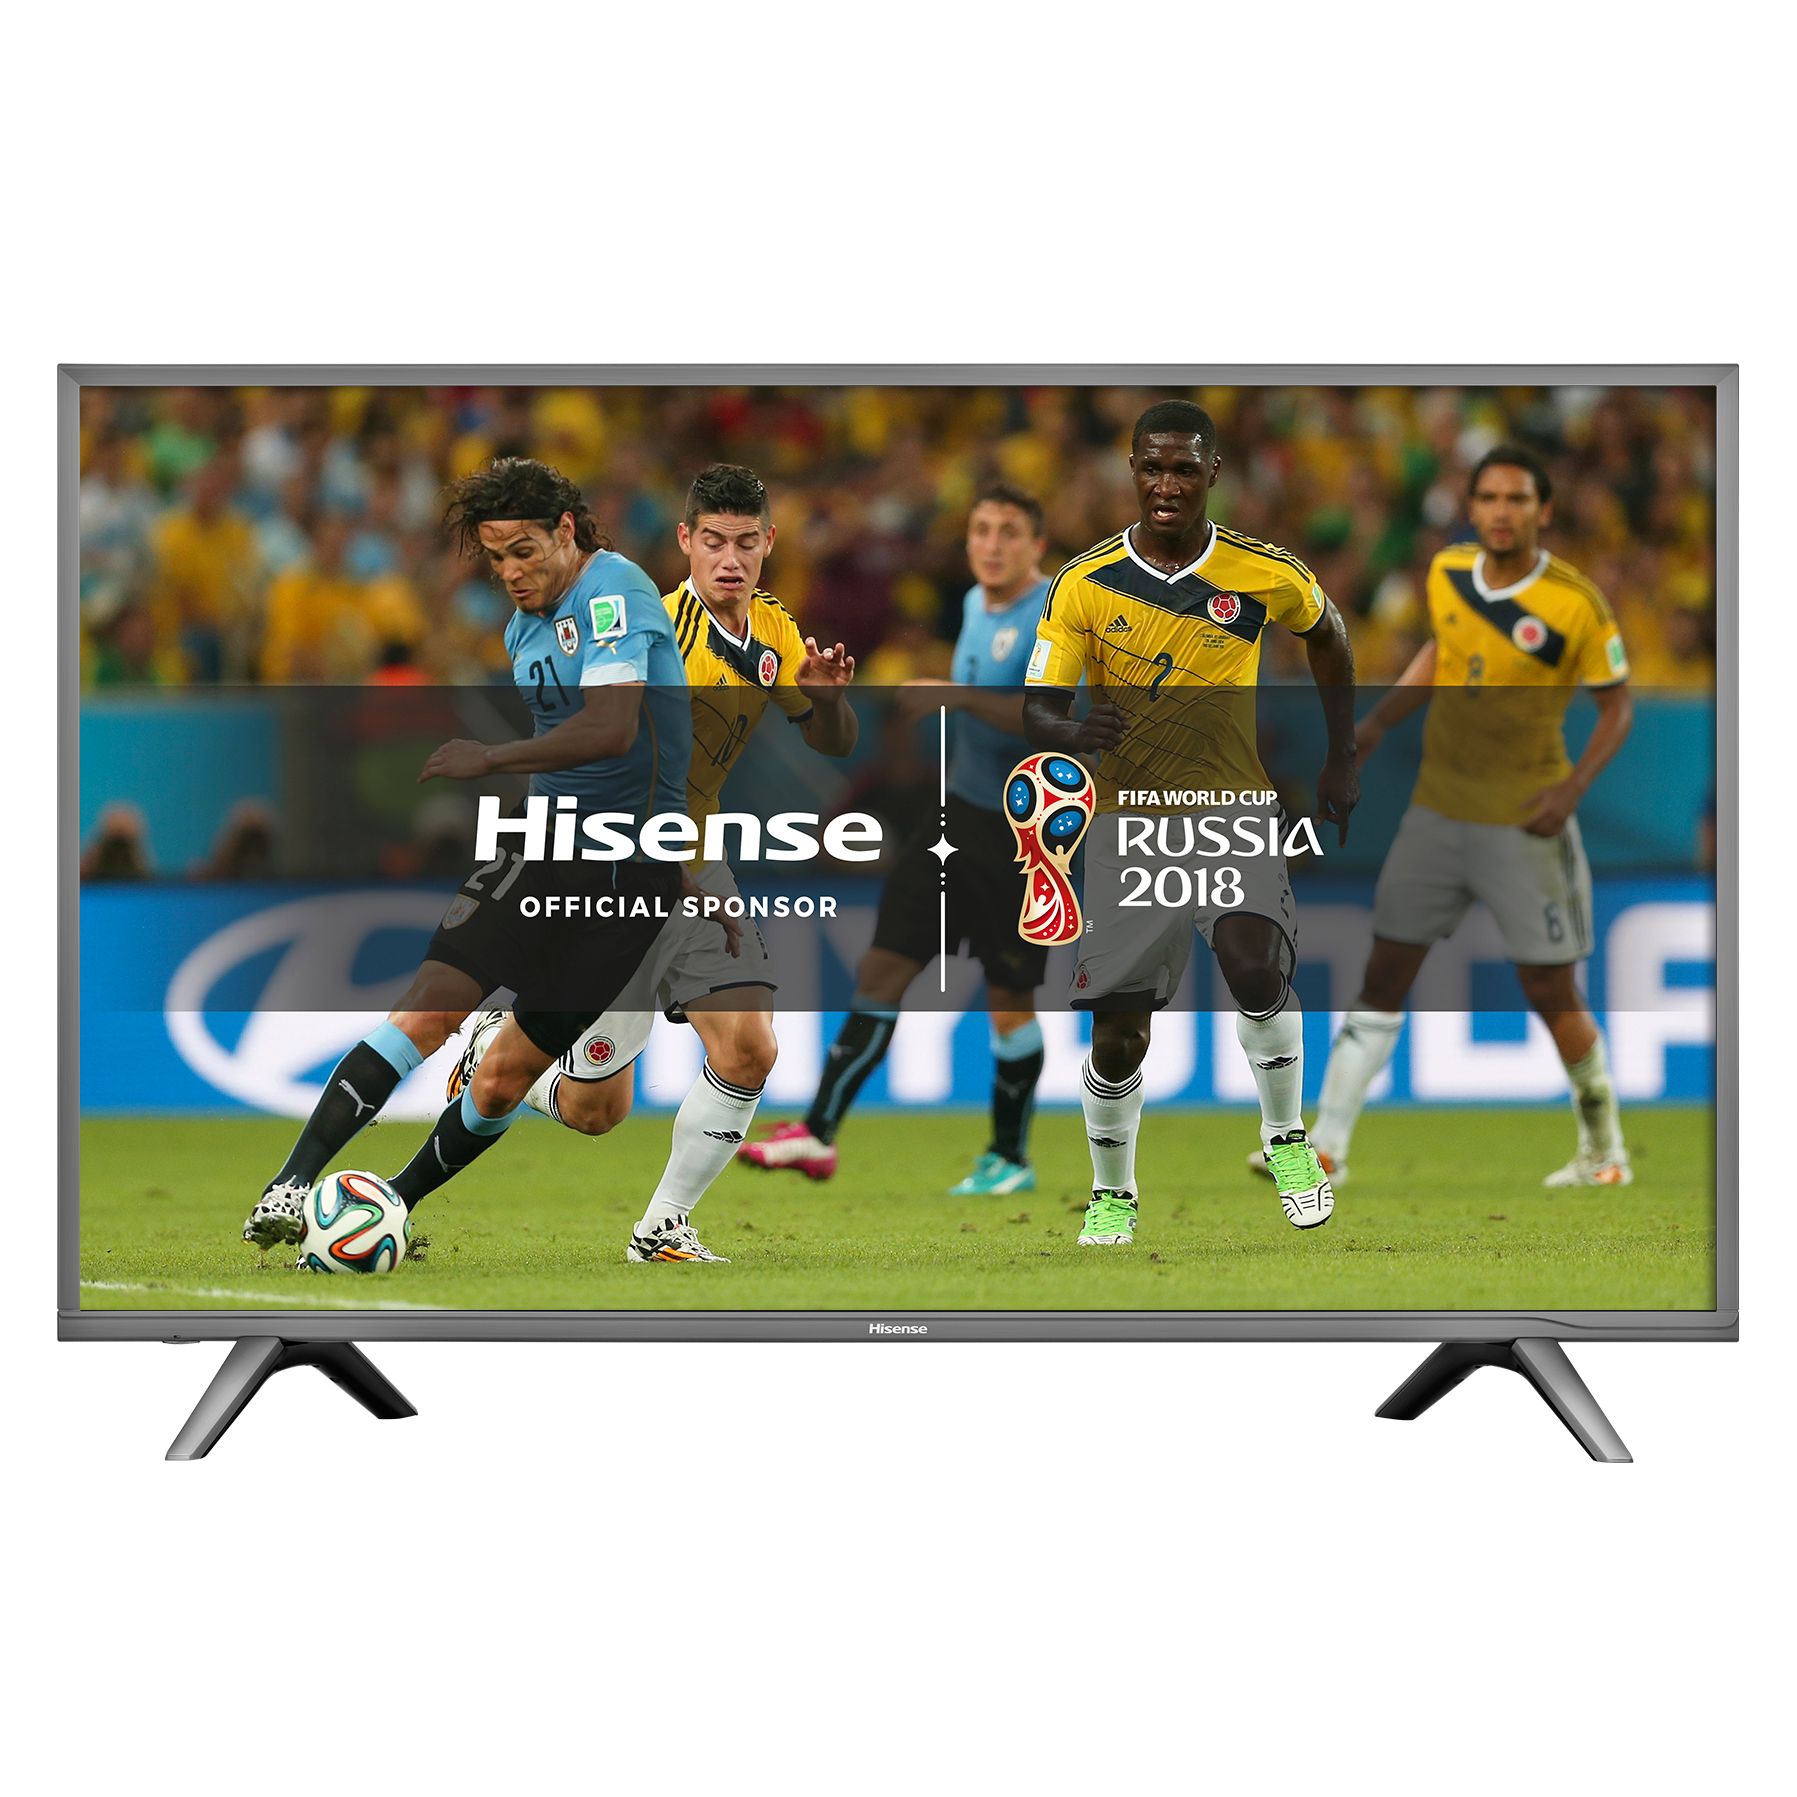 Hisense H55N5700 LED HDR 4K Ultra HD Smart TV, 55" with Freeview Play, Dark Grey